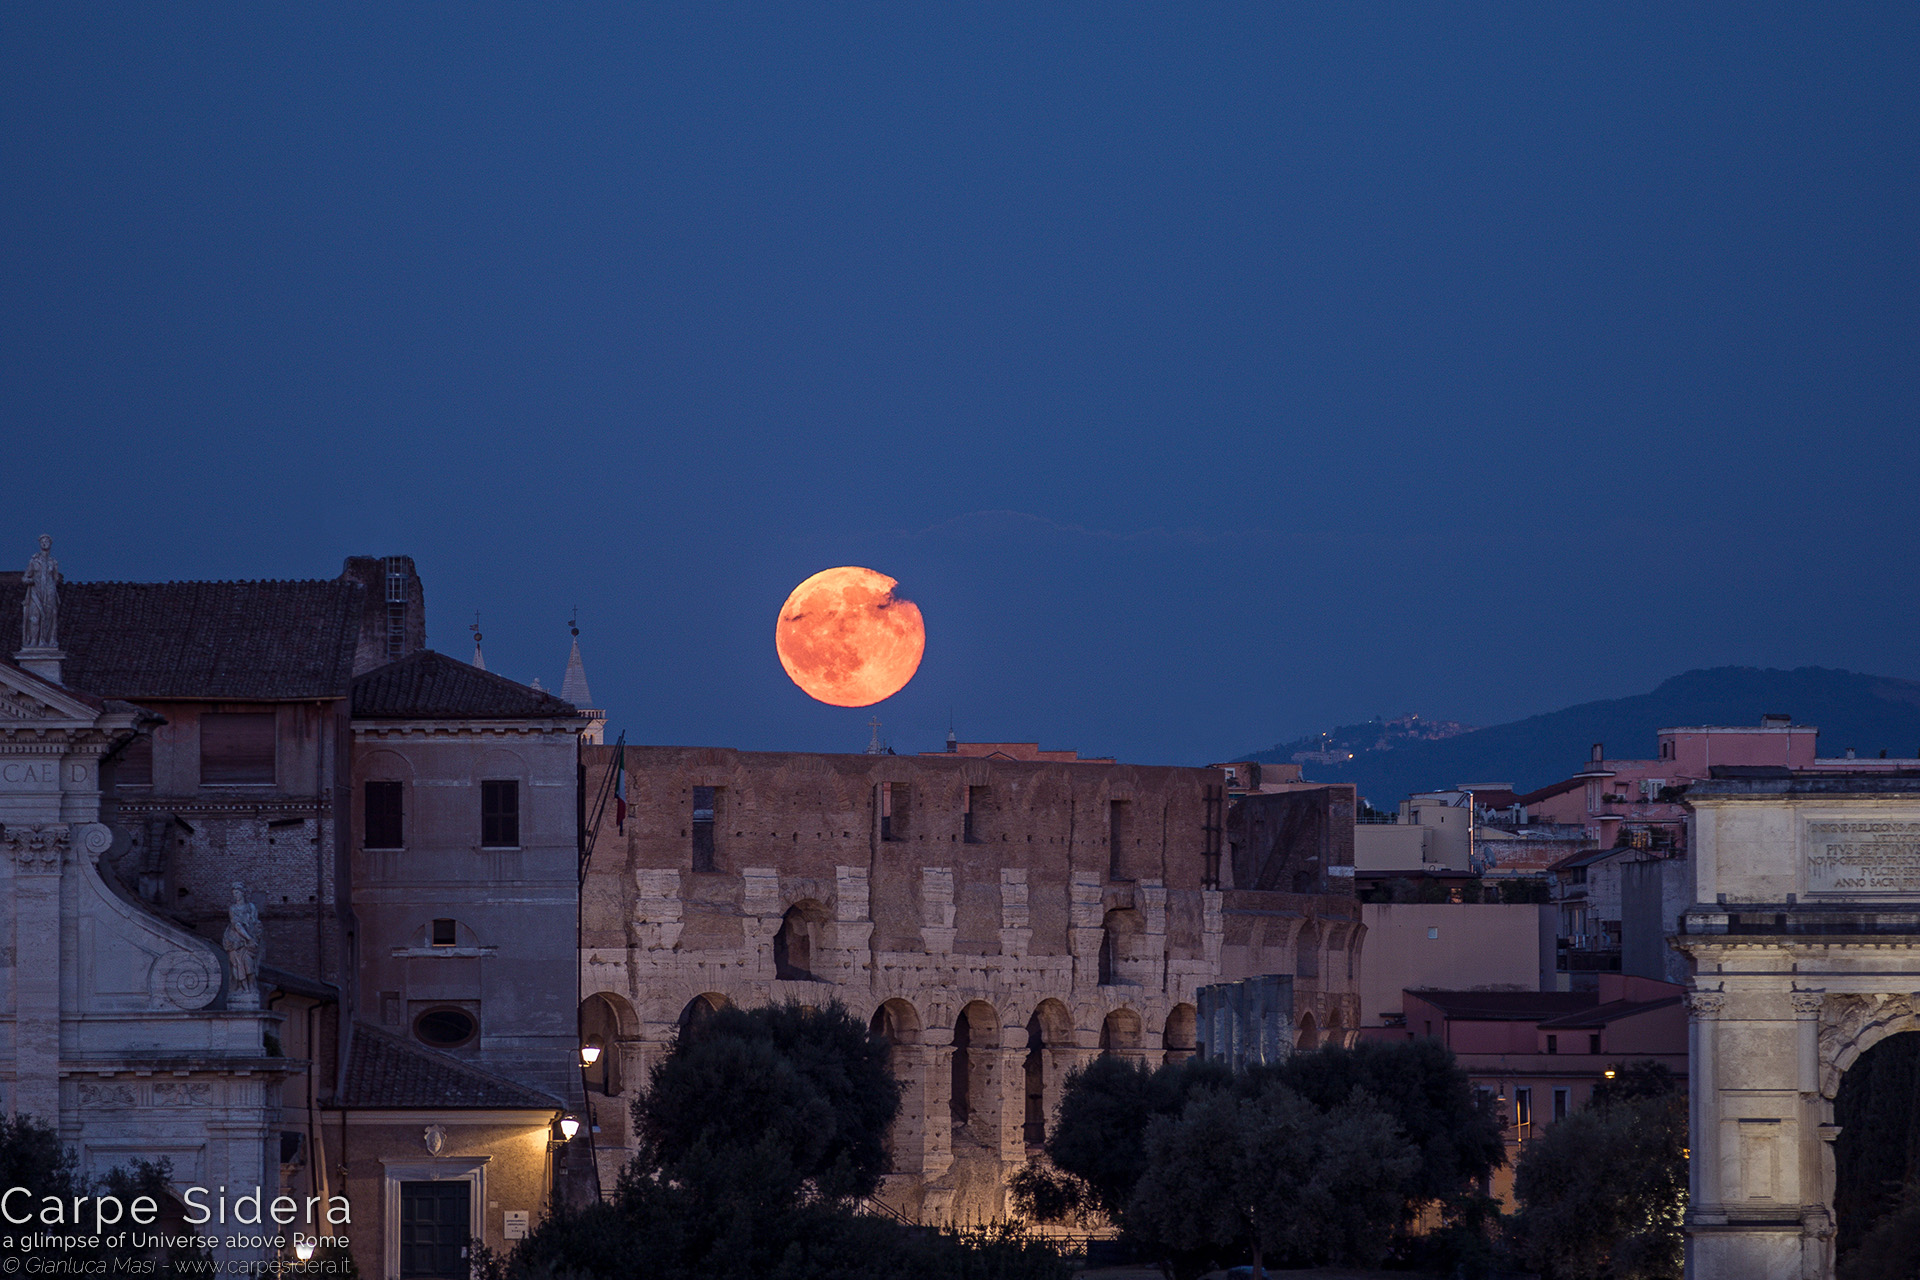 7. The 20 July 2016 full Moon and the Colosseum.